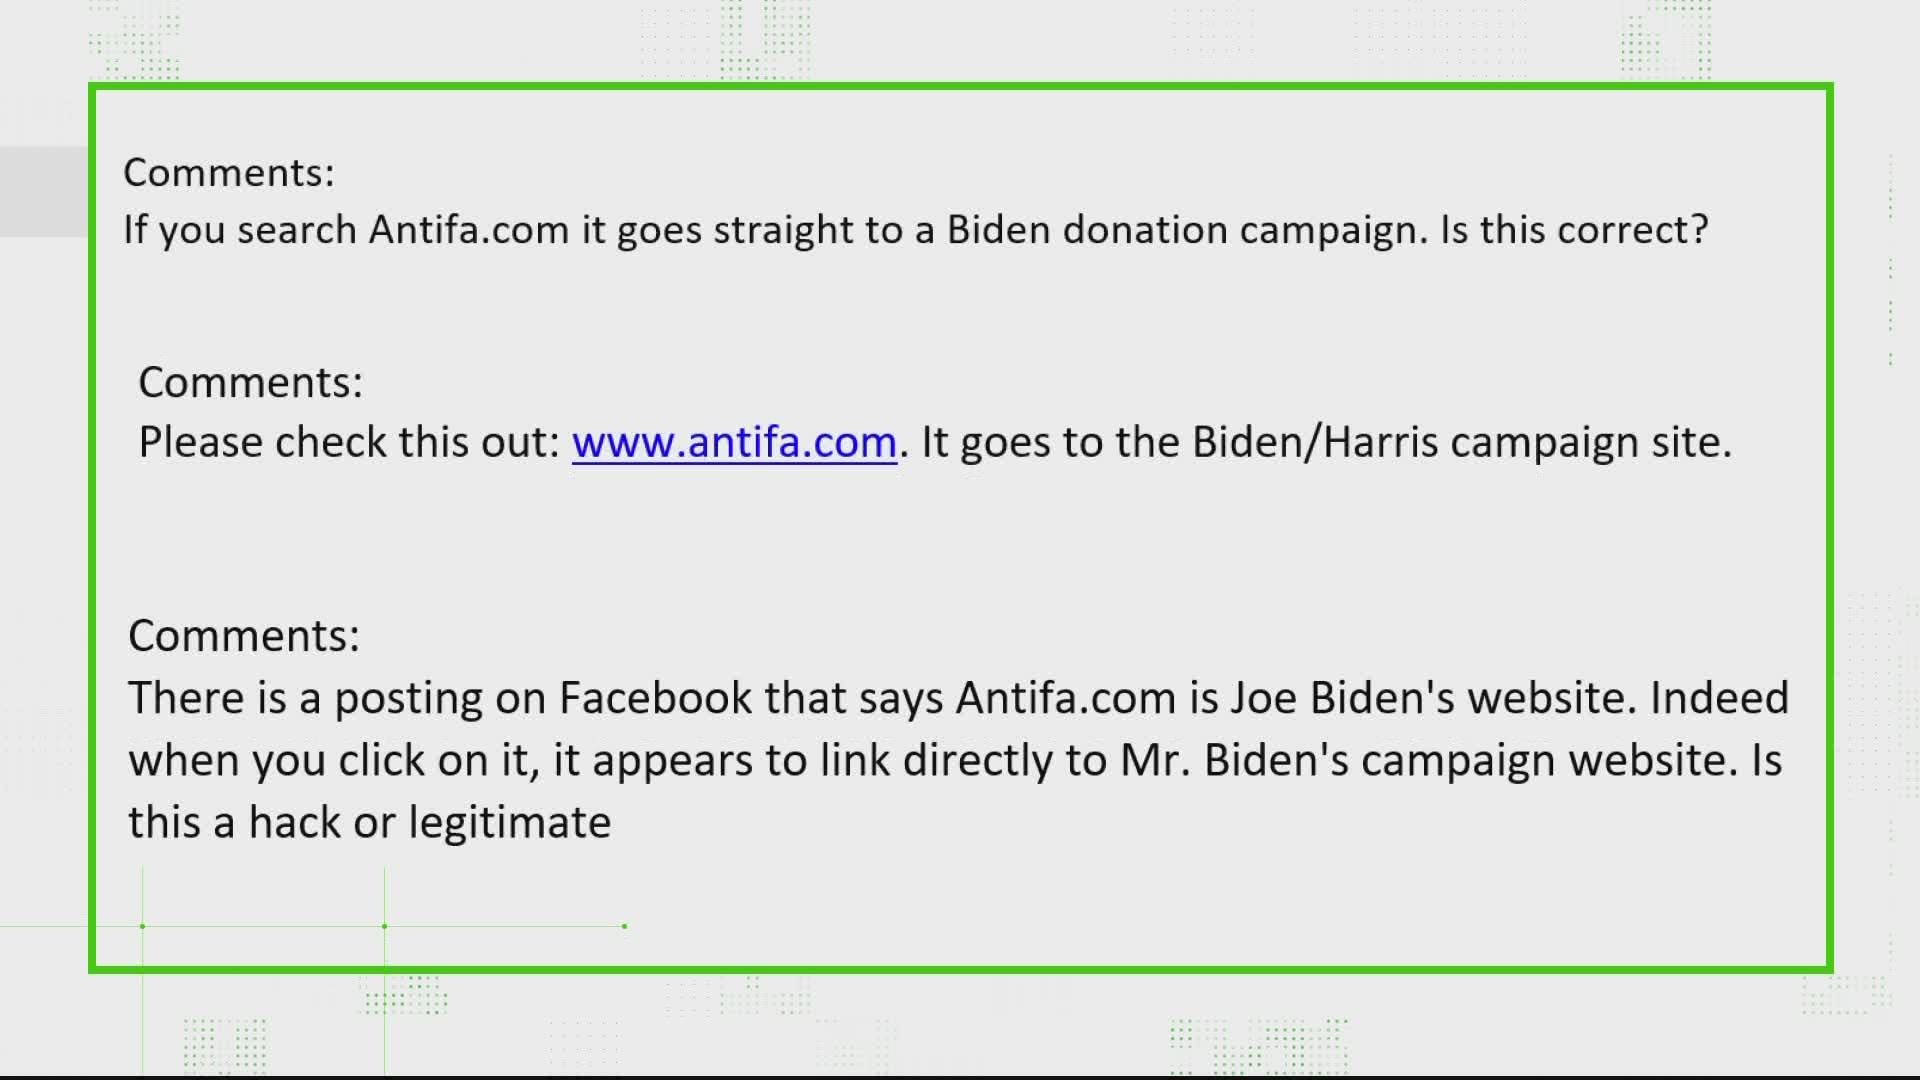 Viewers emailed the Verify team about a website called "antifa.com," asking why it redirects to Joe Biden's campaign site. Here's what our Verify team found out.